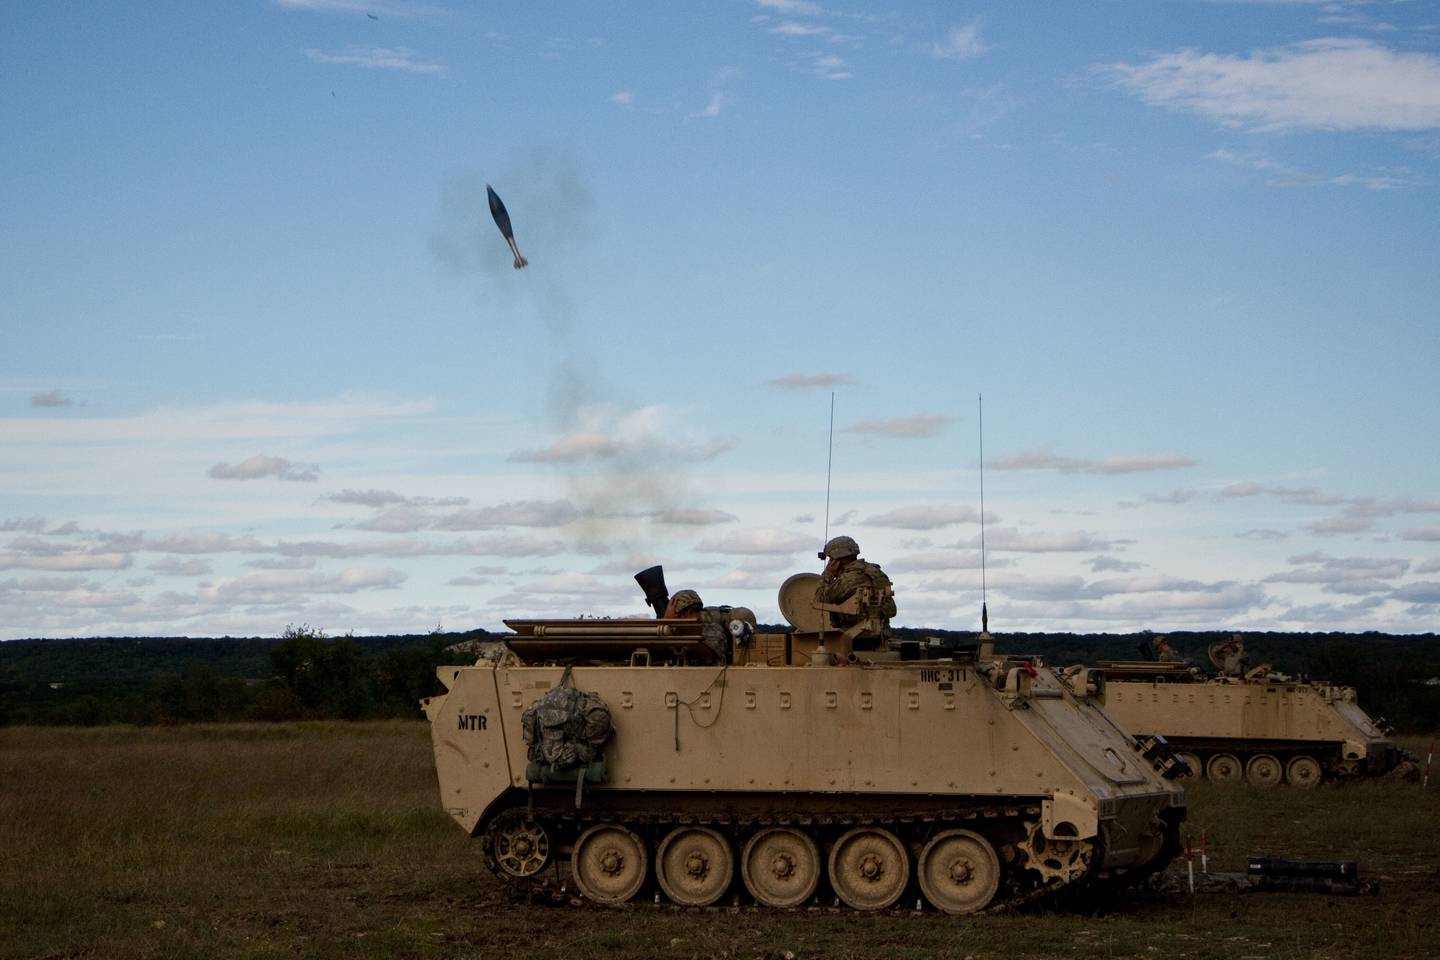 U.S. Army soldiers fire mortars from a cannon mounted on a M113 armored personnel carrier during an exercise Oct. 25, 2018, in the Fort Hood training area.